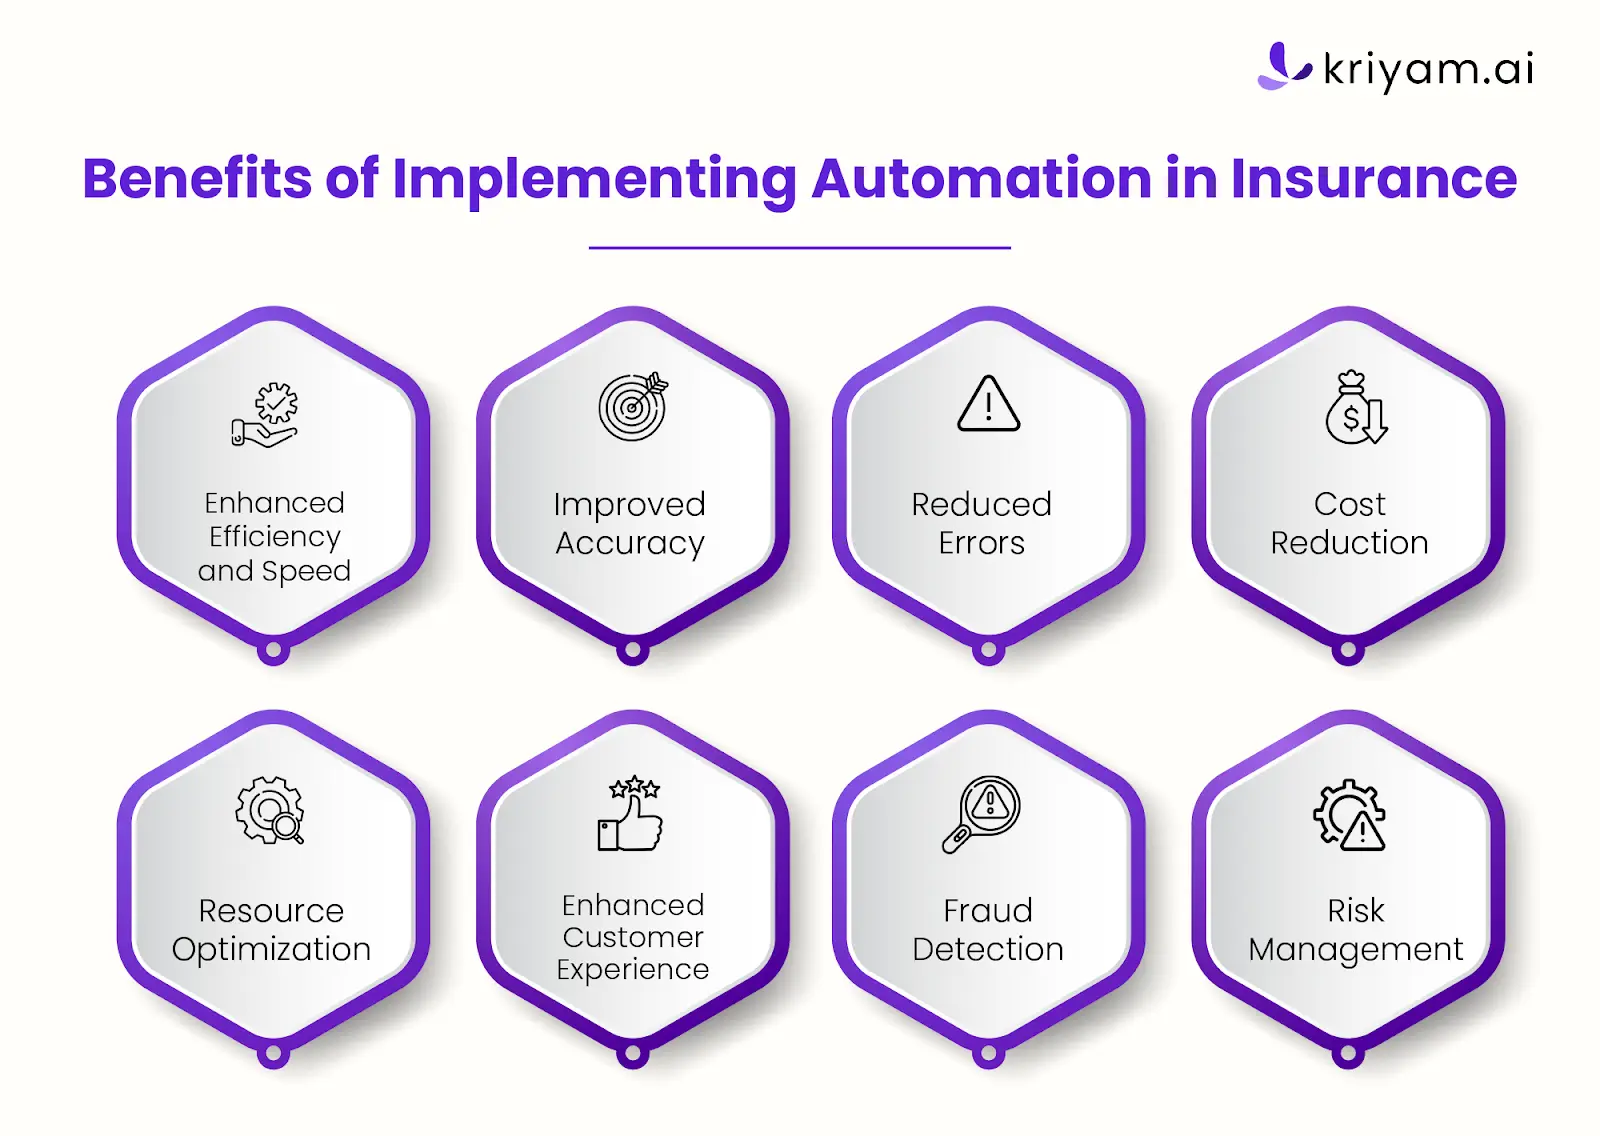 Benefits of Implementing Automation in Insurance.